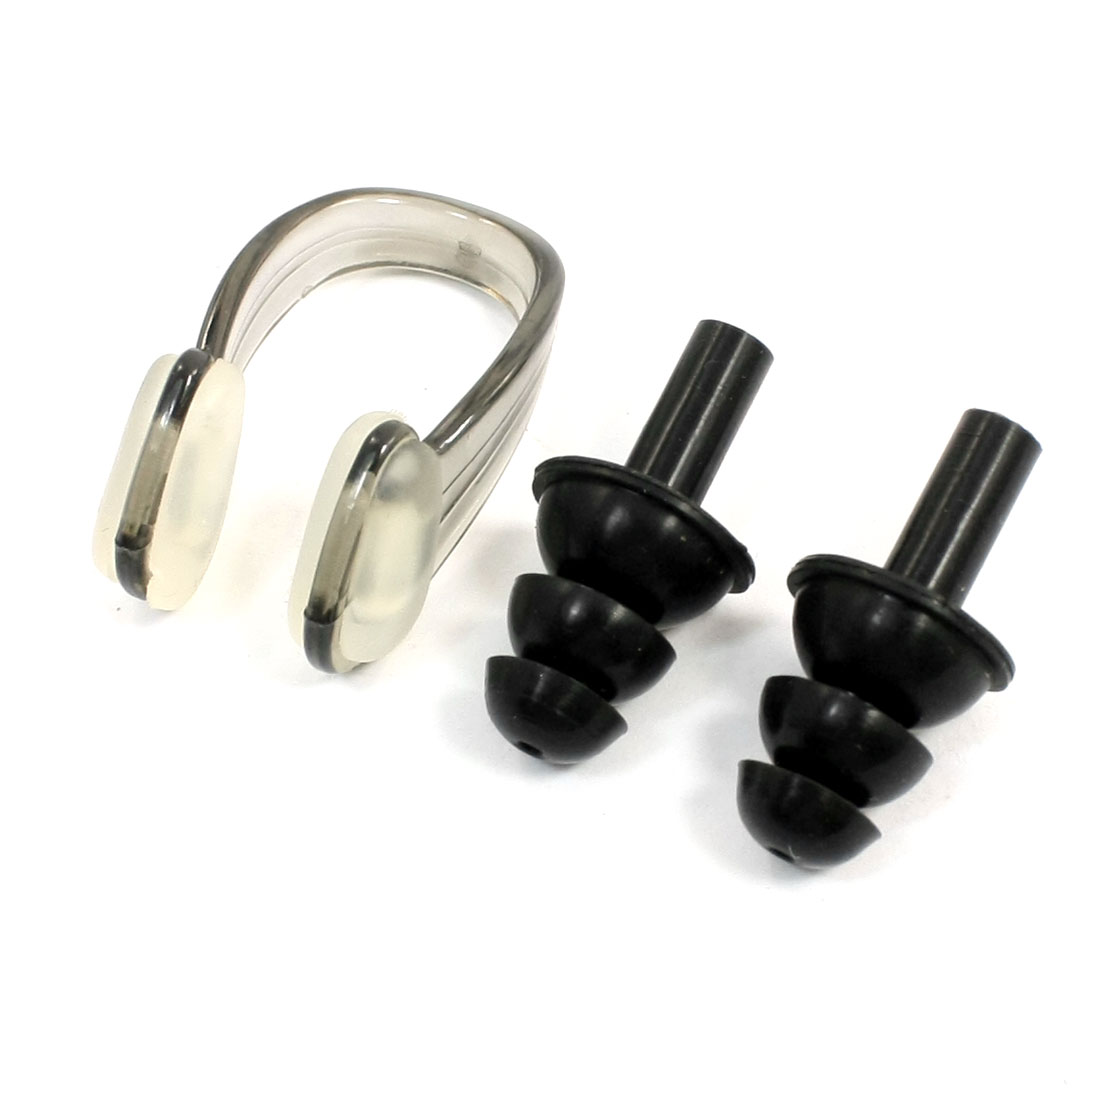 Unique Bargains One Size Fits Most Water Sports Gear Swimming Nose Clip + Earplugs Set For Swimmers